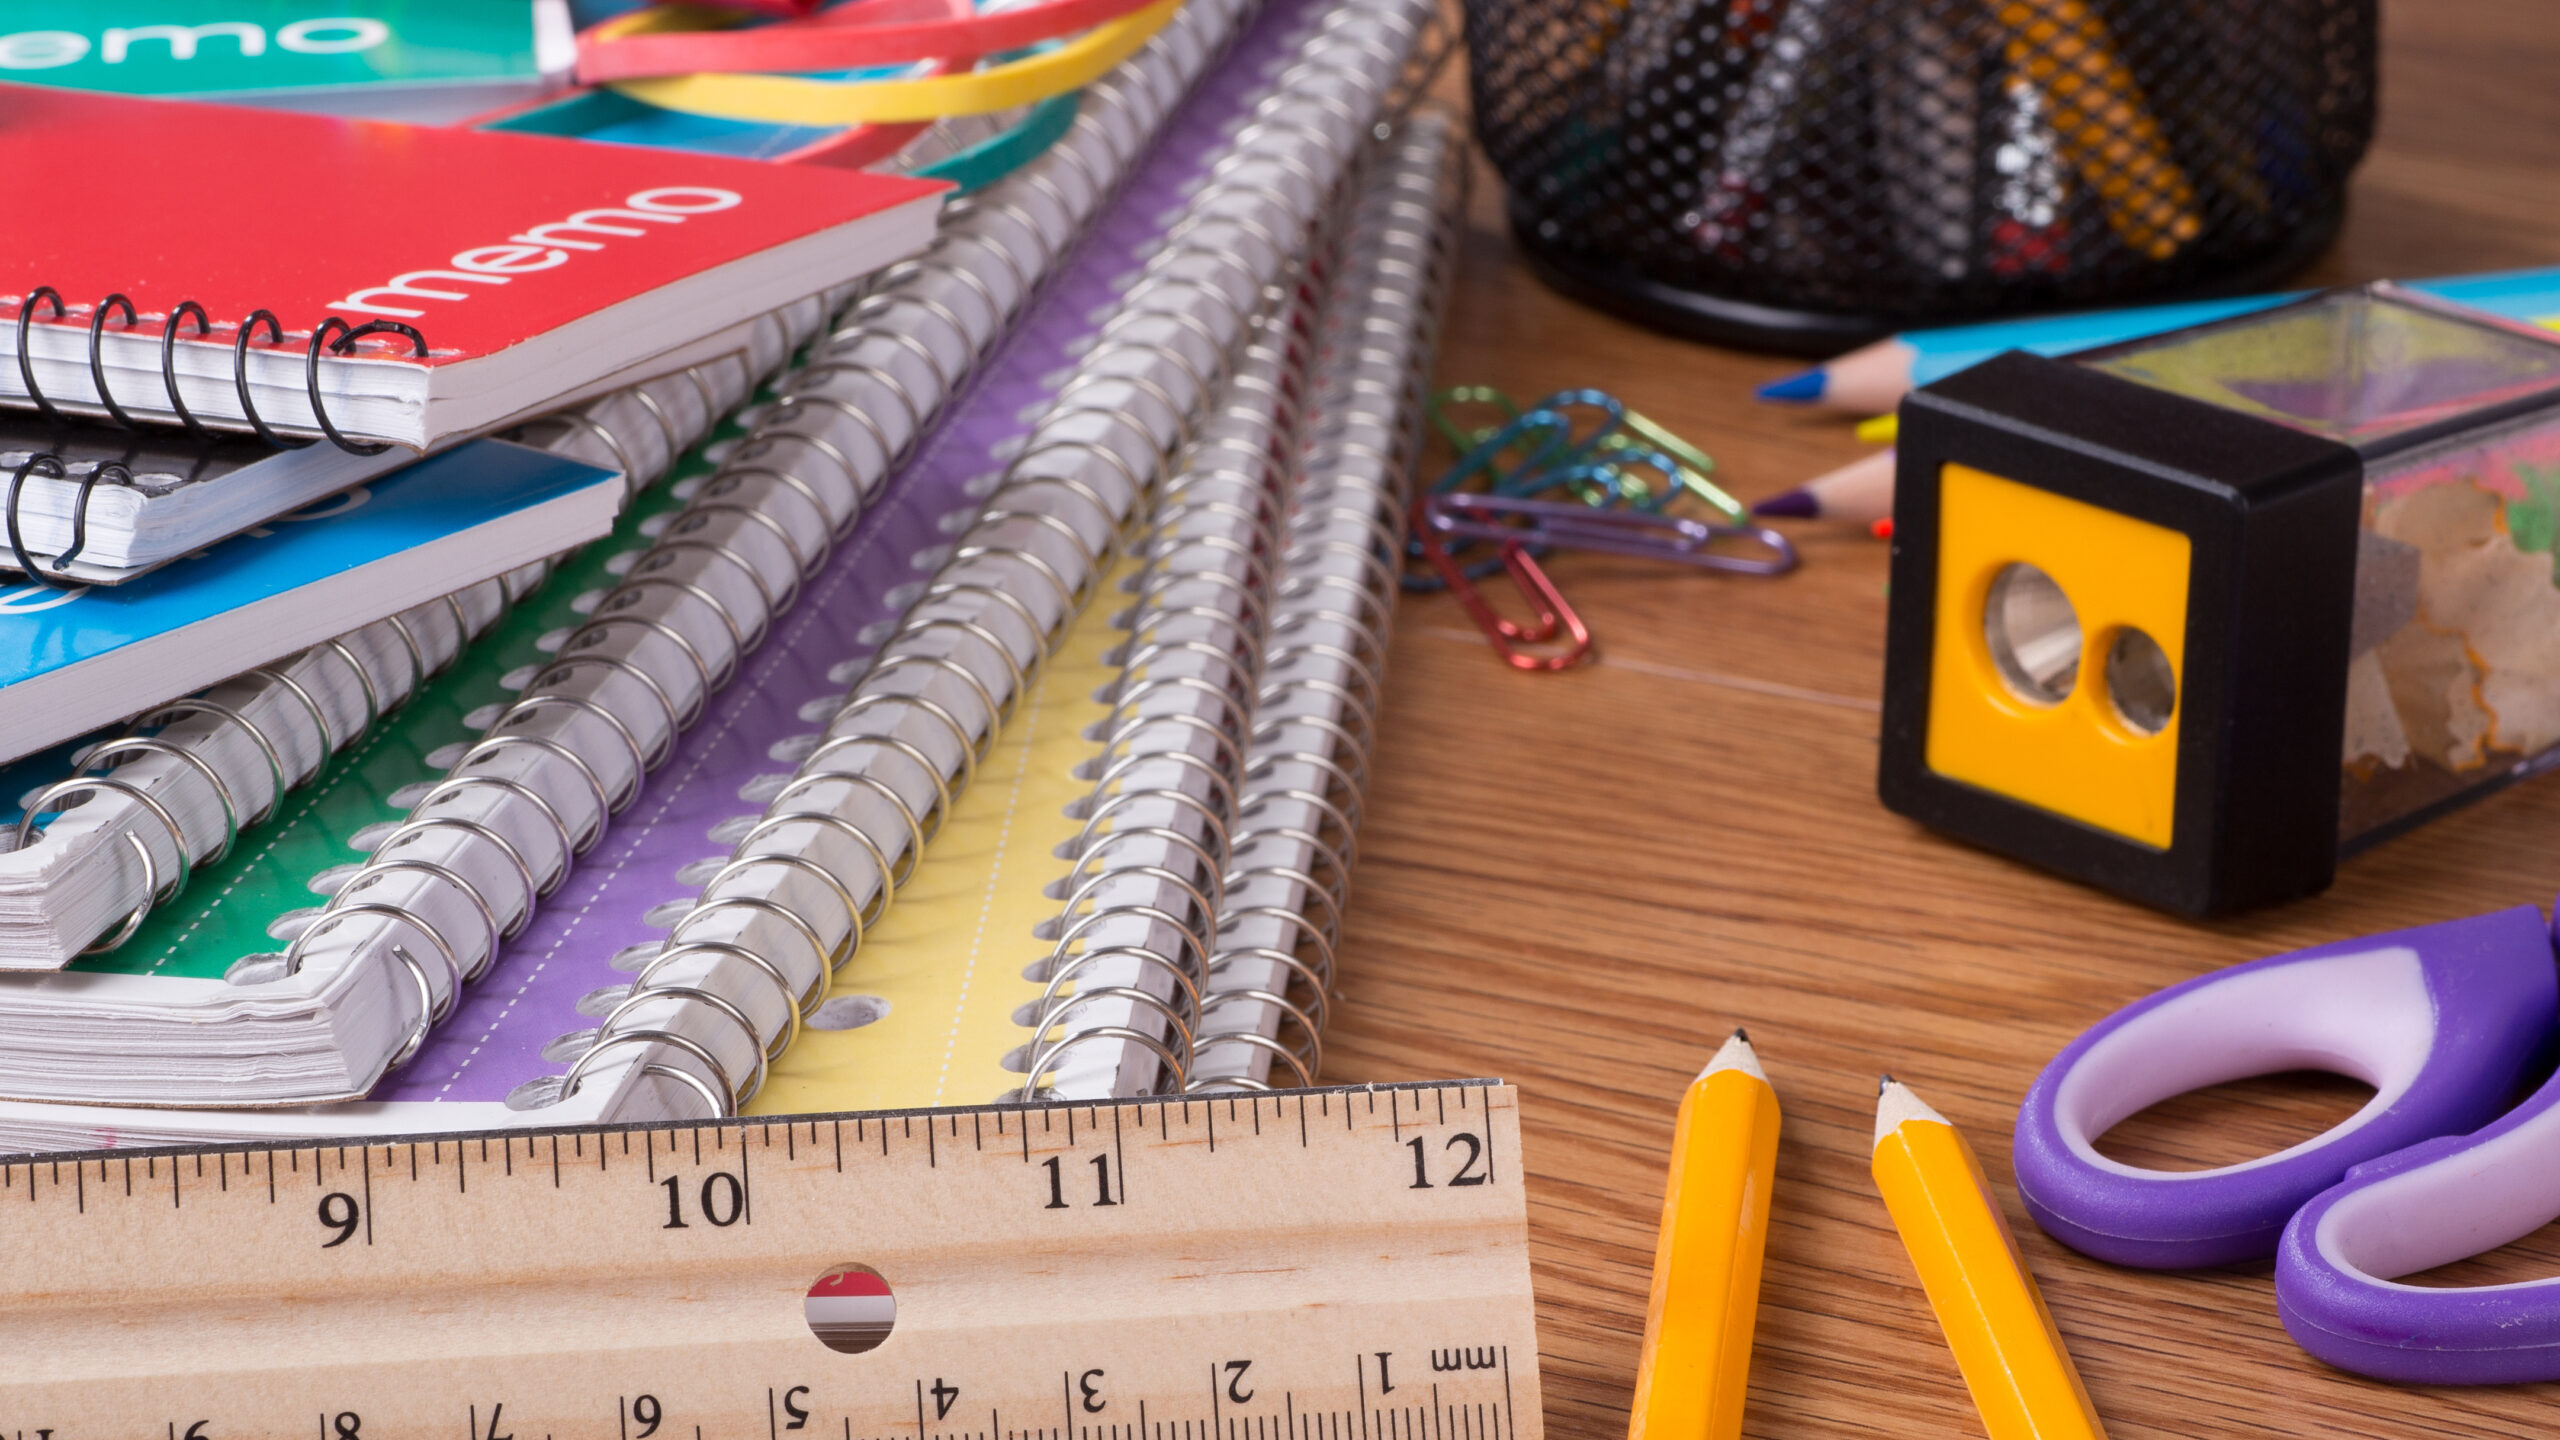 Where to get the best prices on school supplies